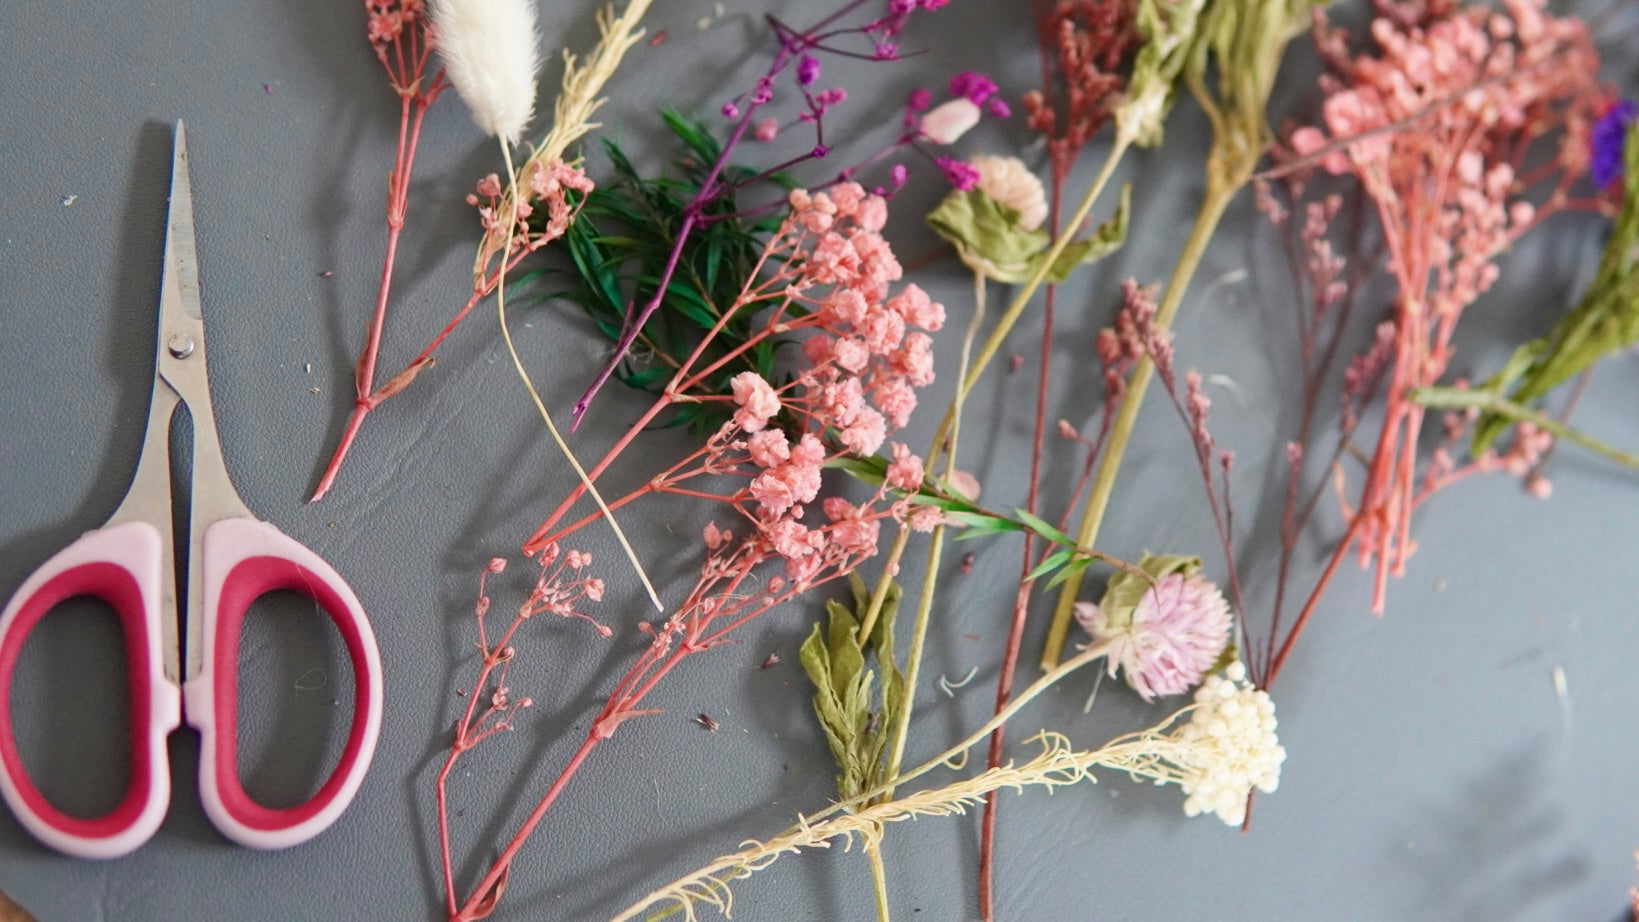 Make dried flowers together